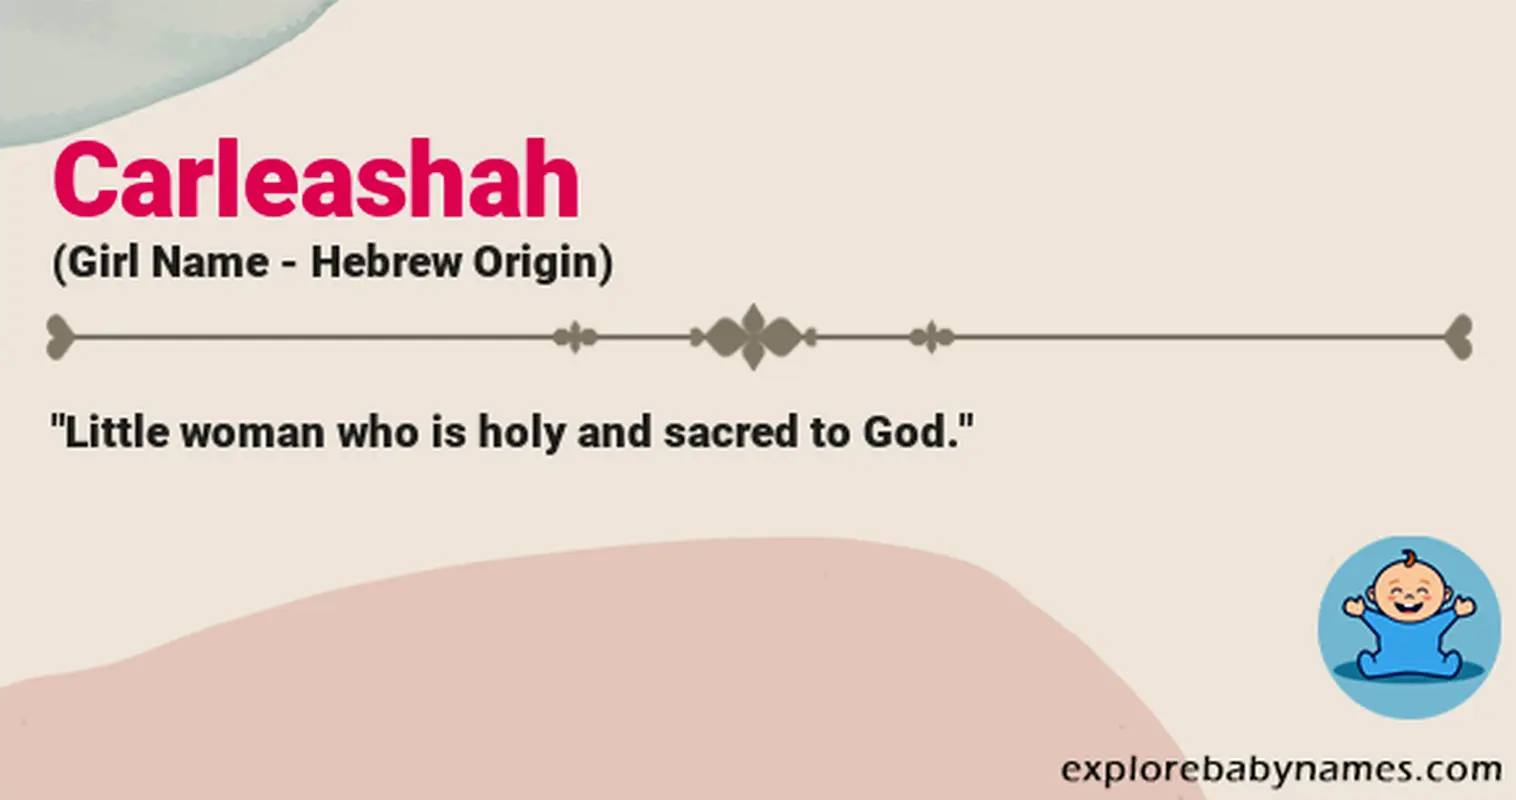 Meaning of Carleashah